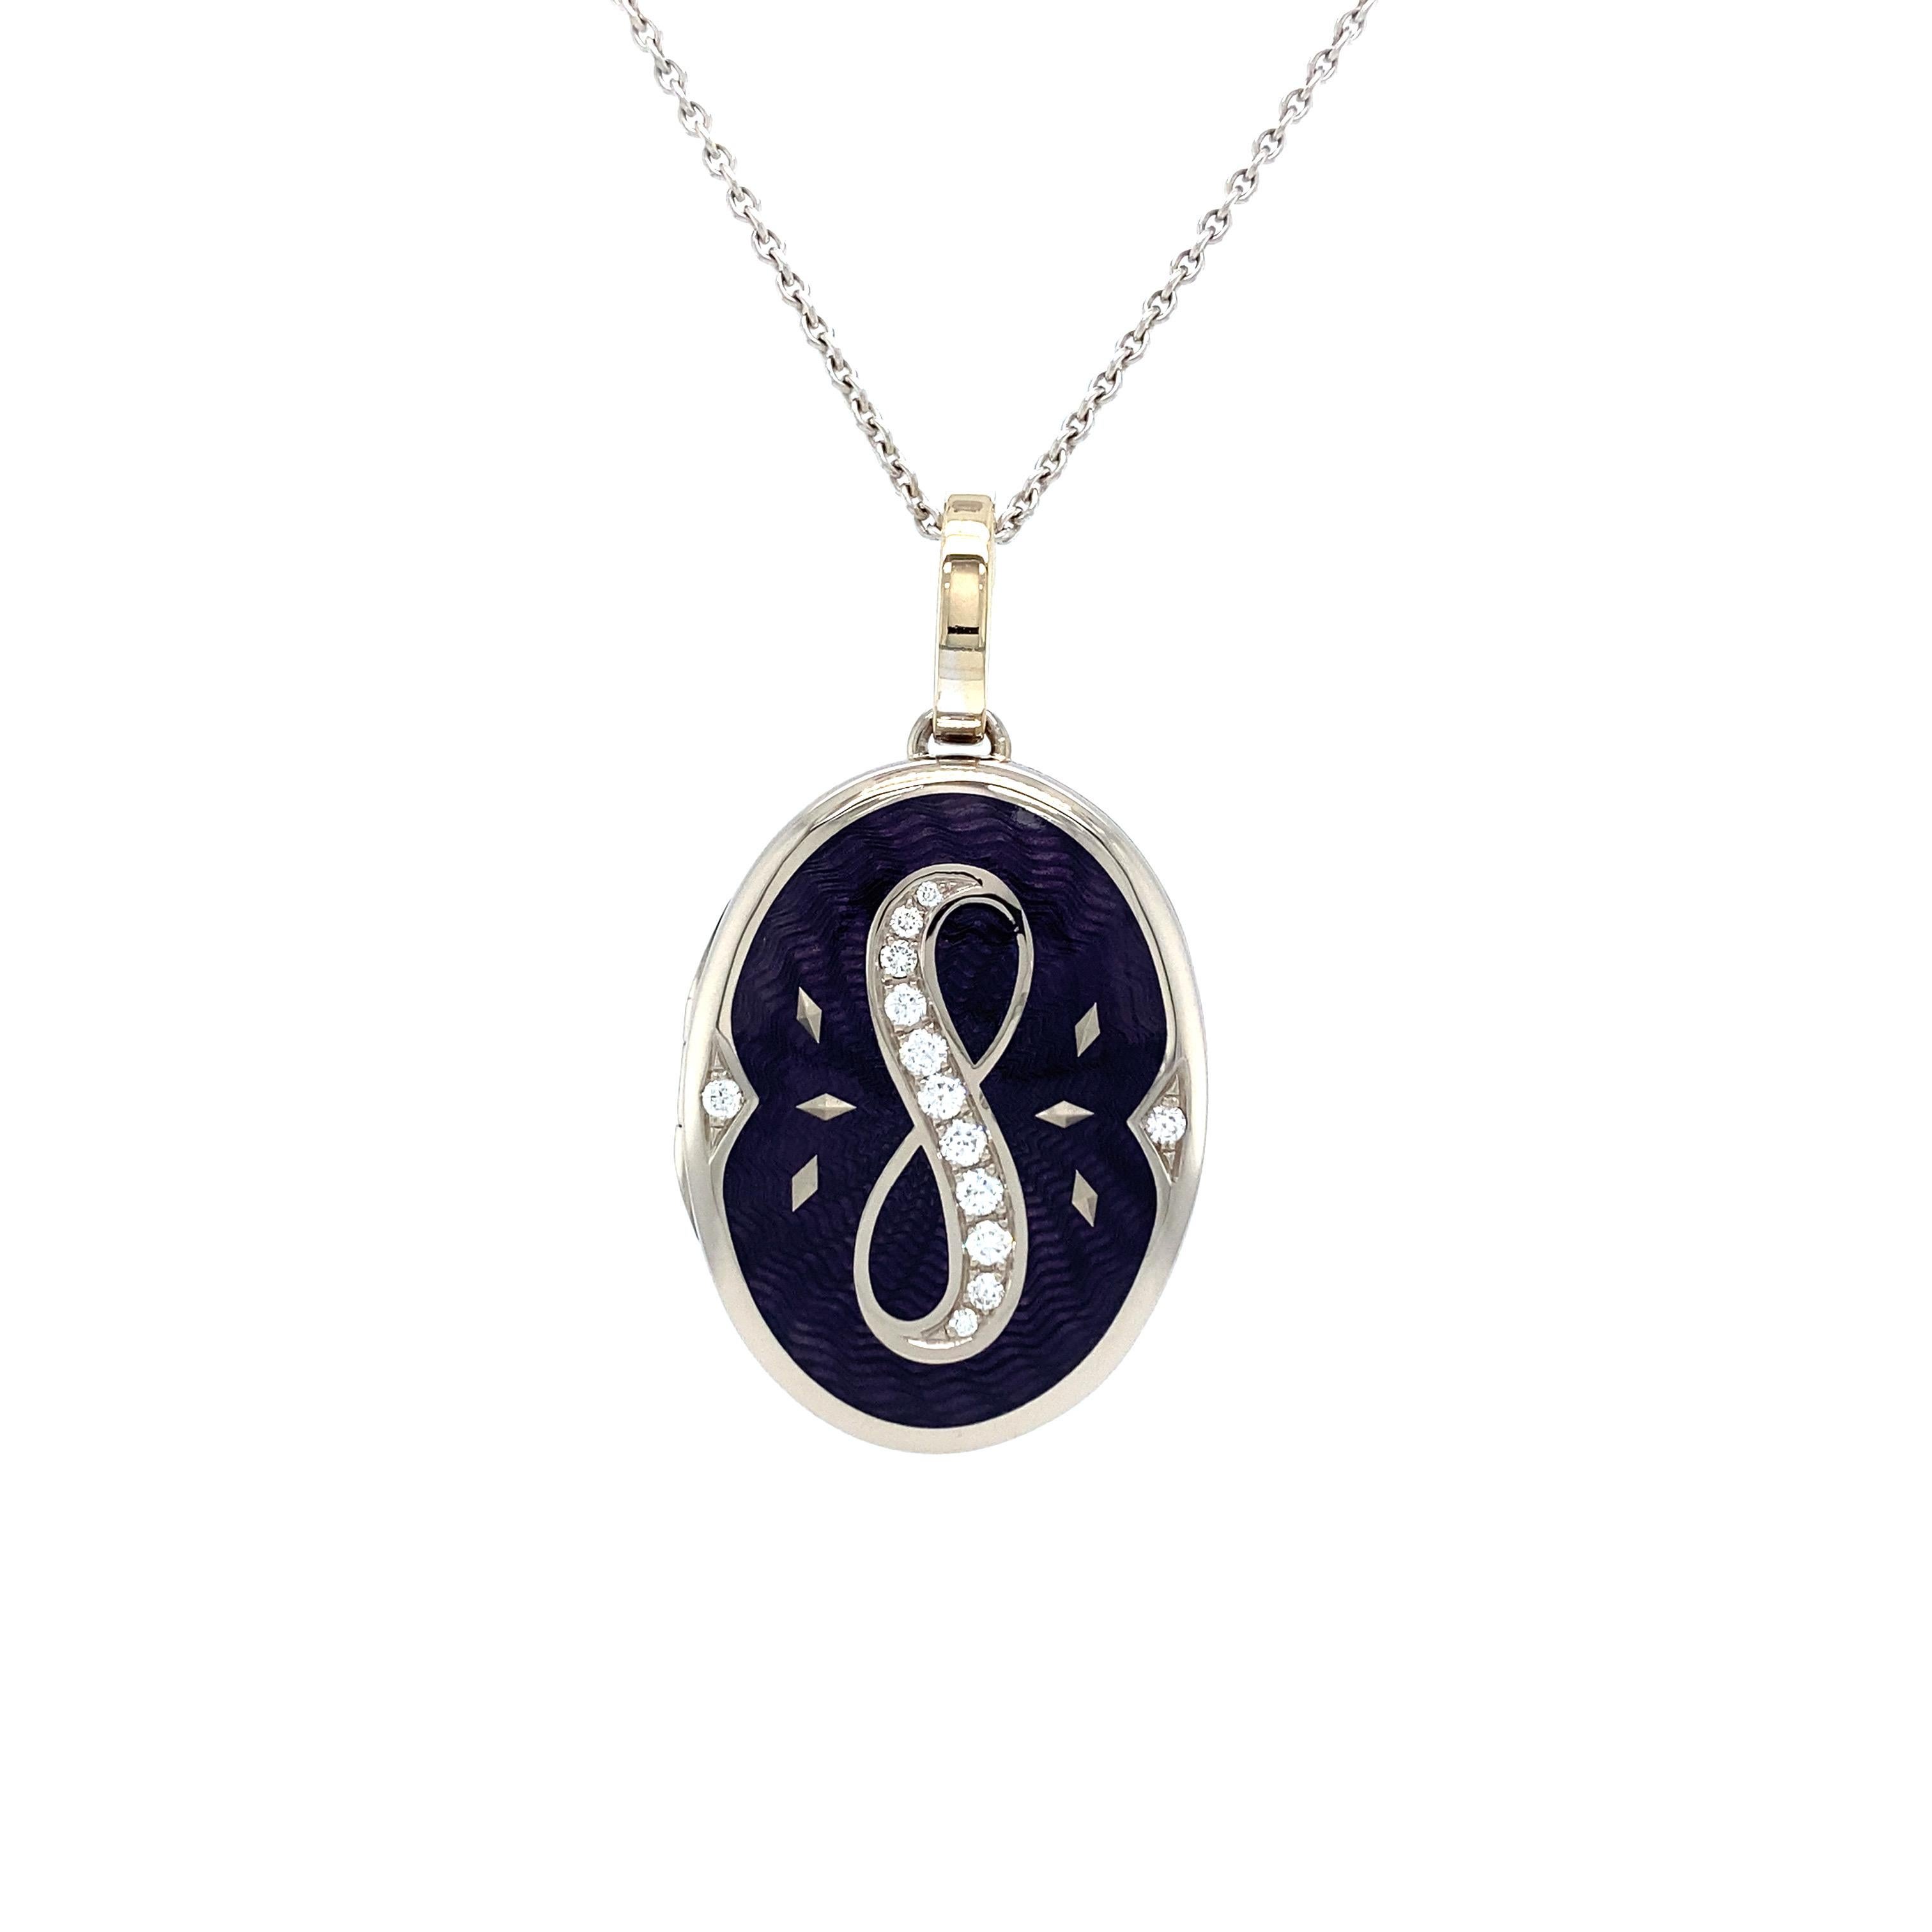 Victor Mayer customizable oval locket pendant necklace with infinity symbol, 18k white gold, Victoria Collection, translucent lilac vitreous enamel, guilloche, paillons, 13 diamonds, total 0.22 ct, G VS brilliant cut, measurements app. 17.0 mm x